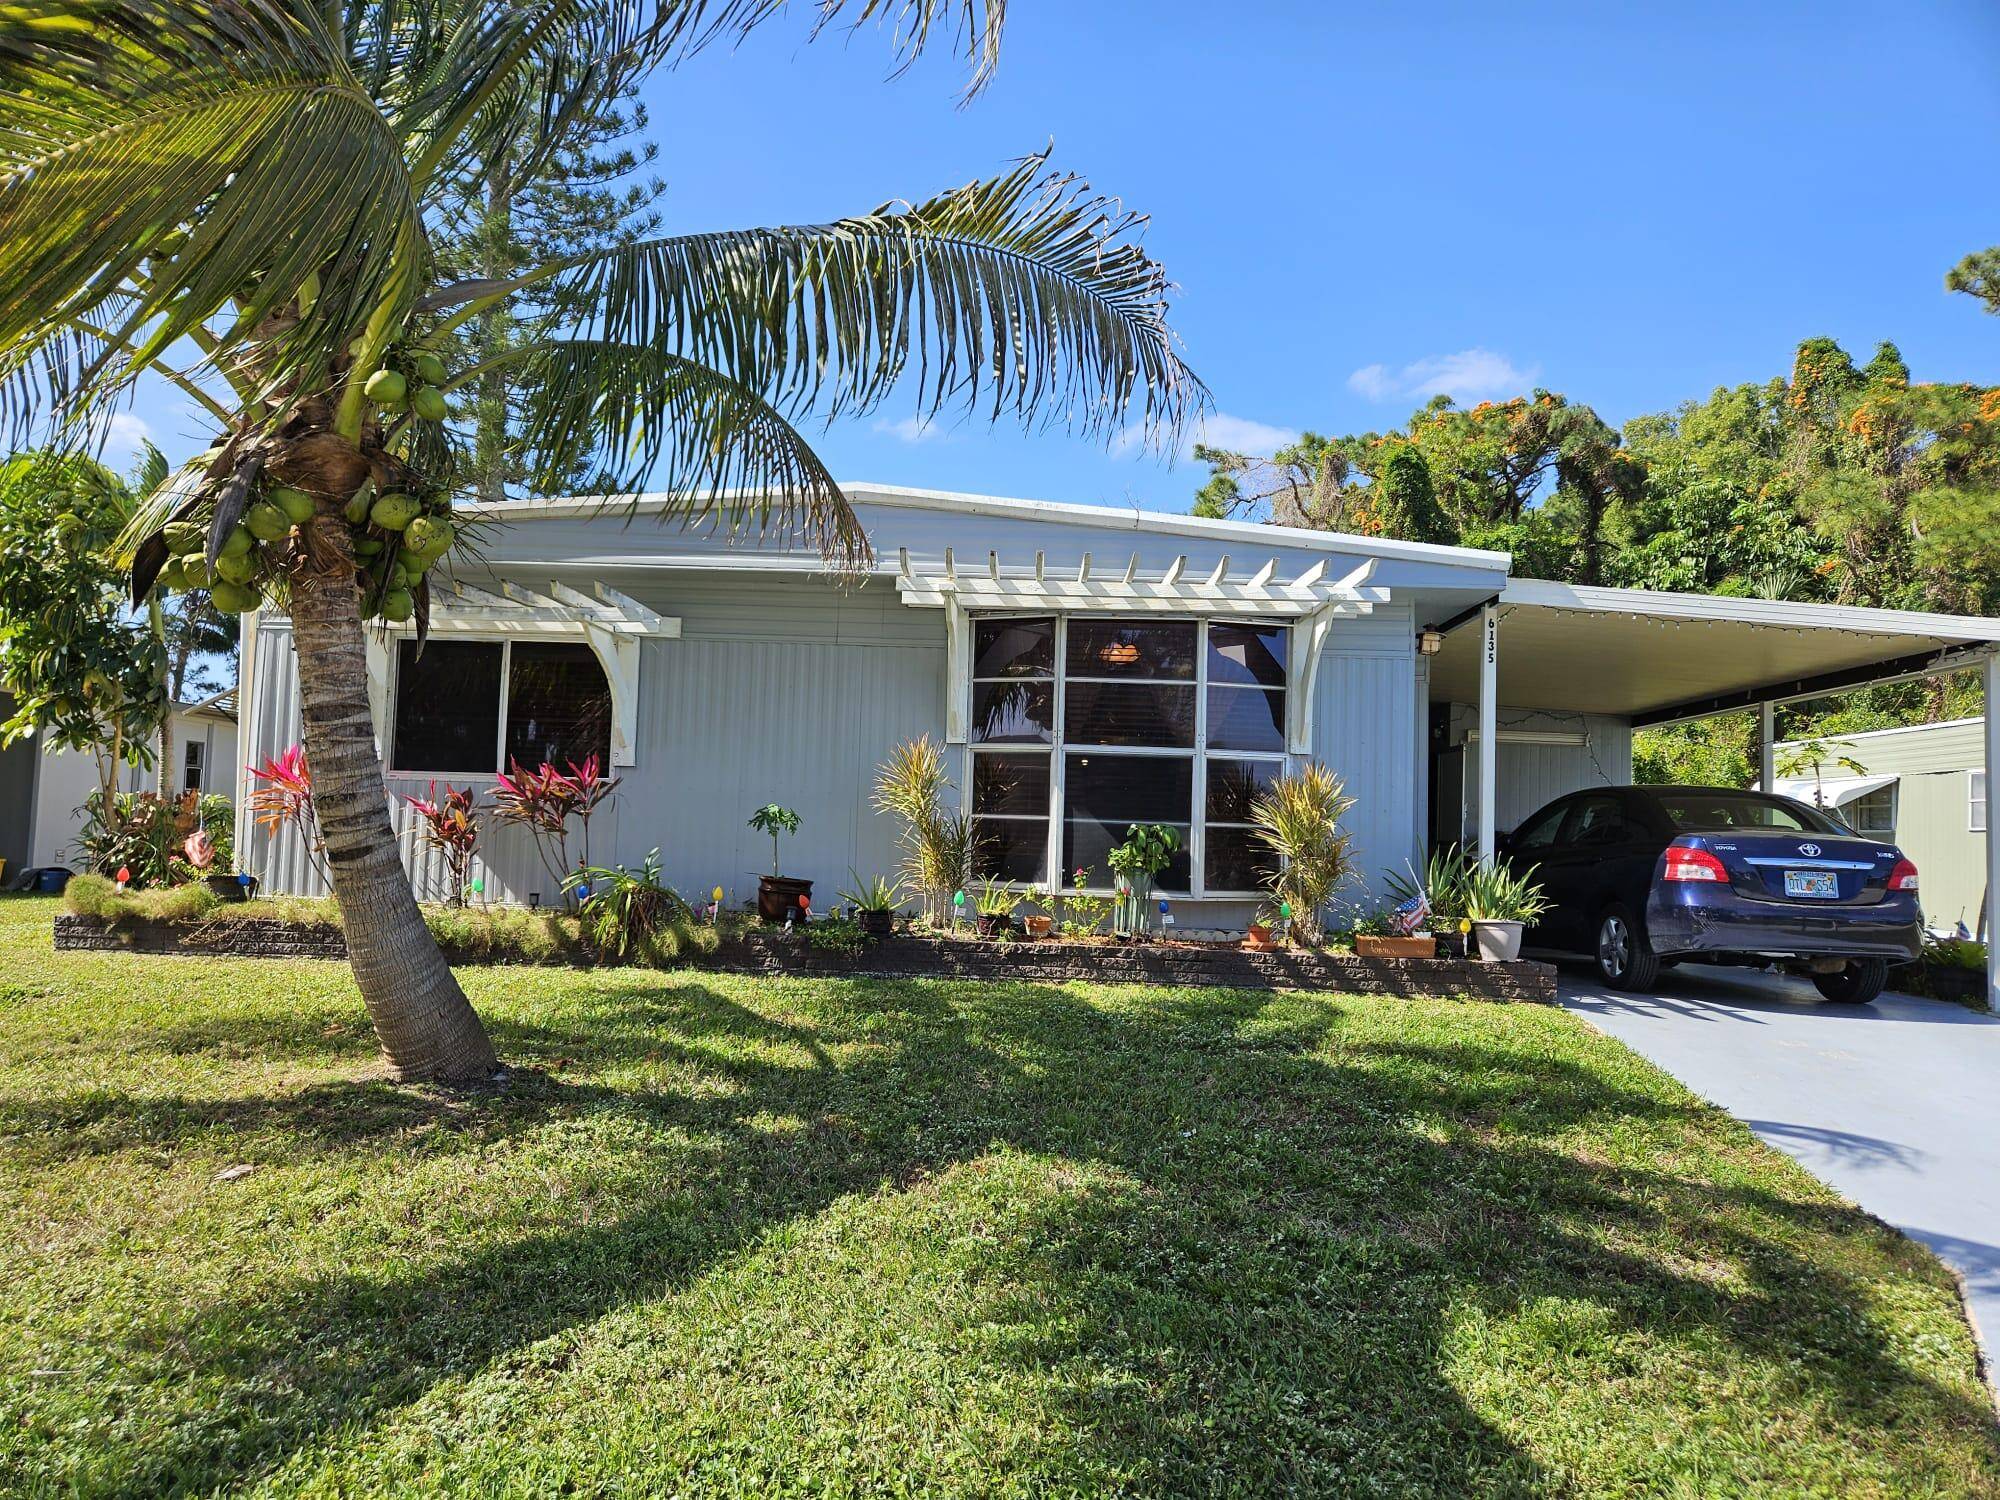 BEAUTIFUL 2 2 MOBILE HOME LOCATED IN A 55 COMMUNITY IN LANTANA, NEW S S APPLIANCES, A C JUST 2 YEARS OLD.